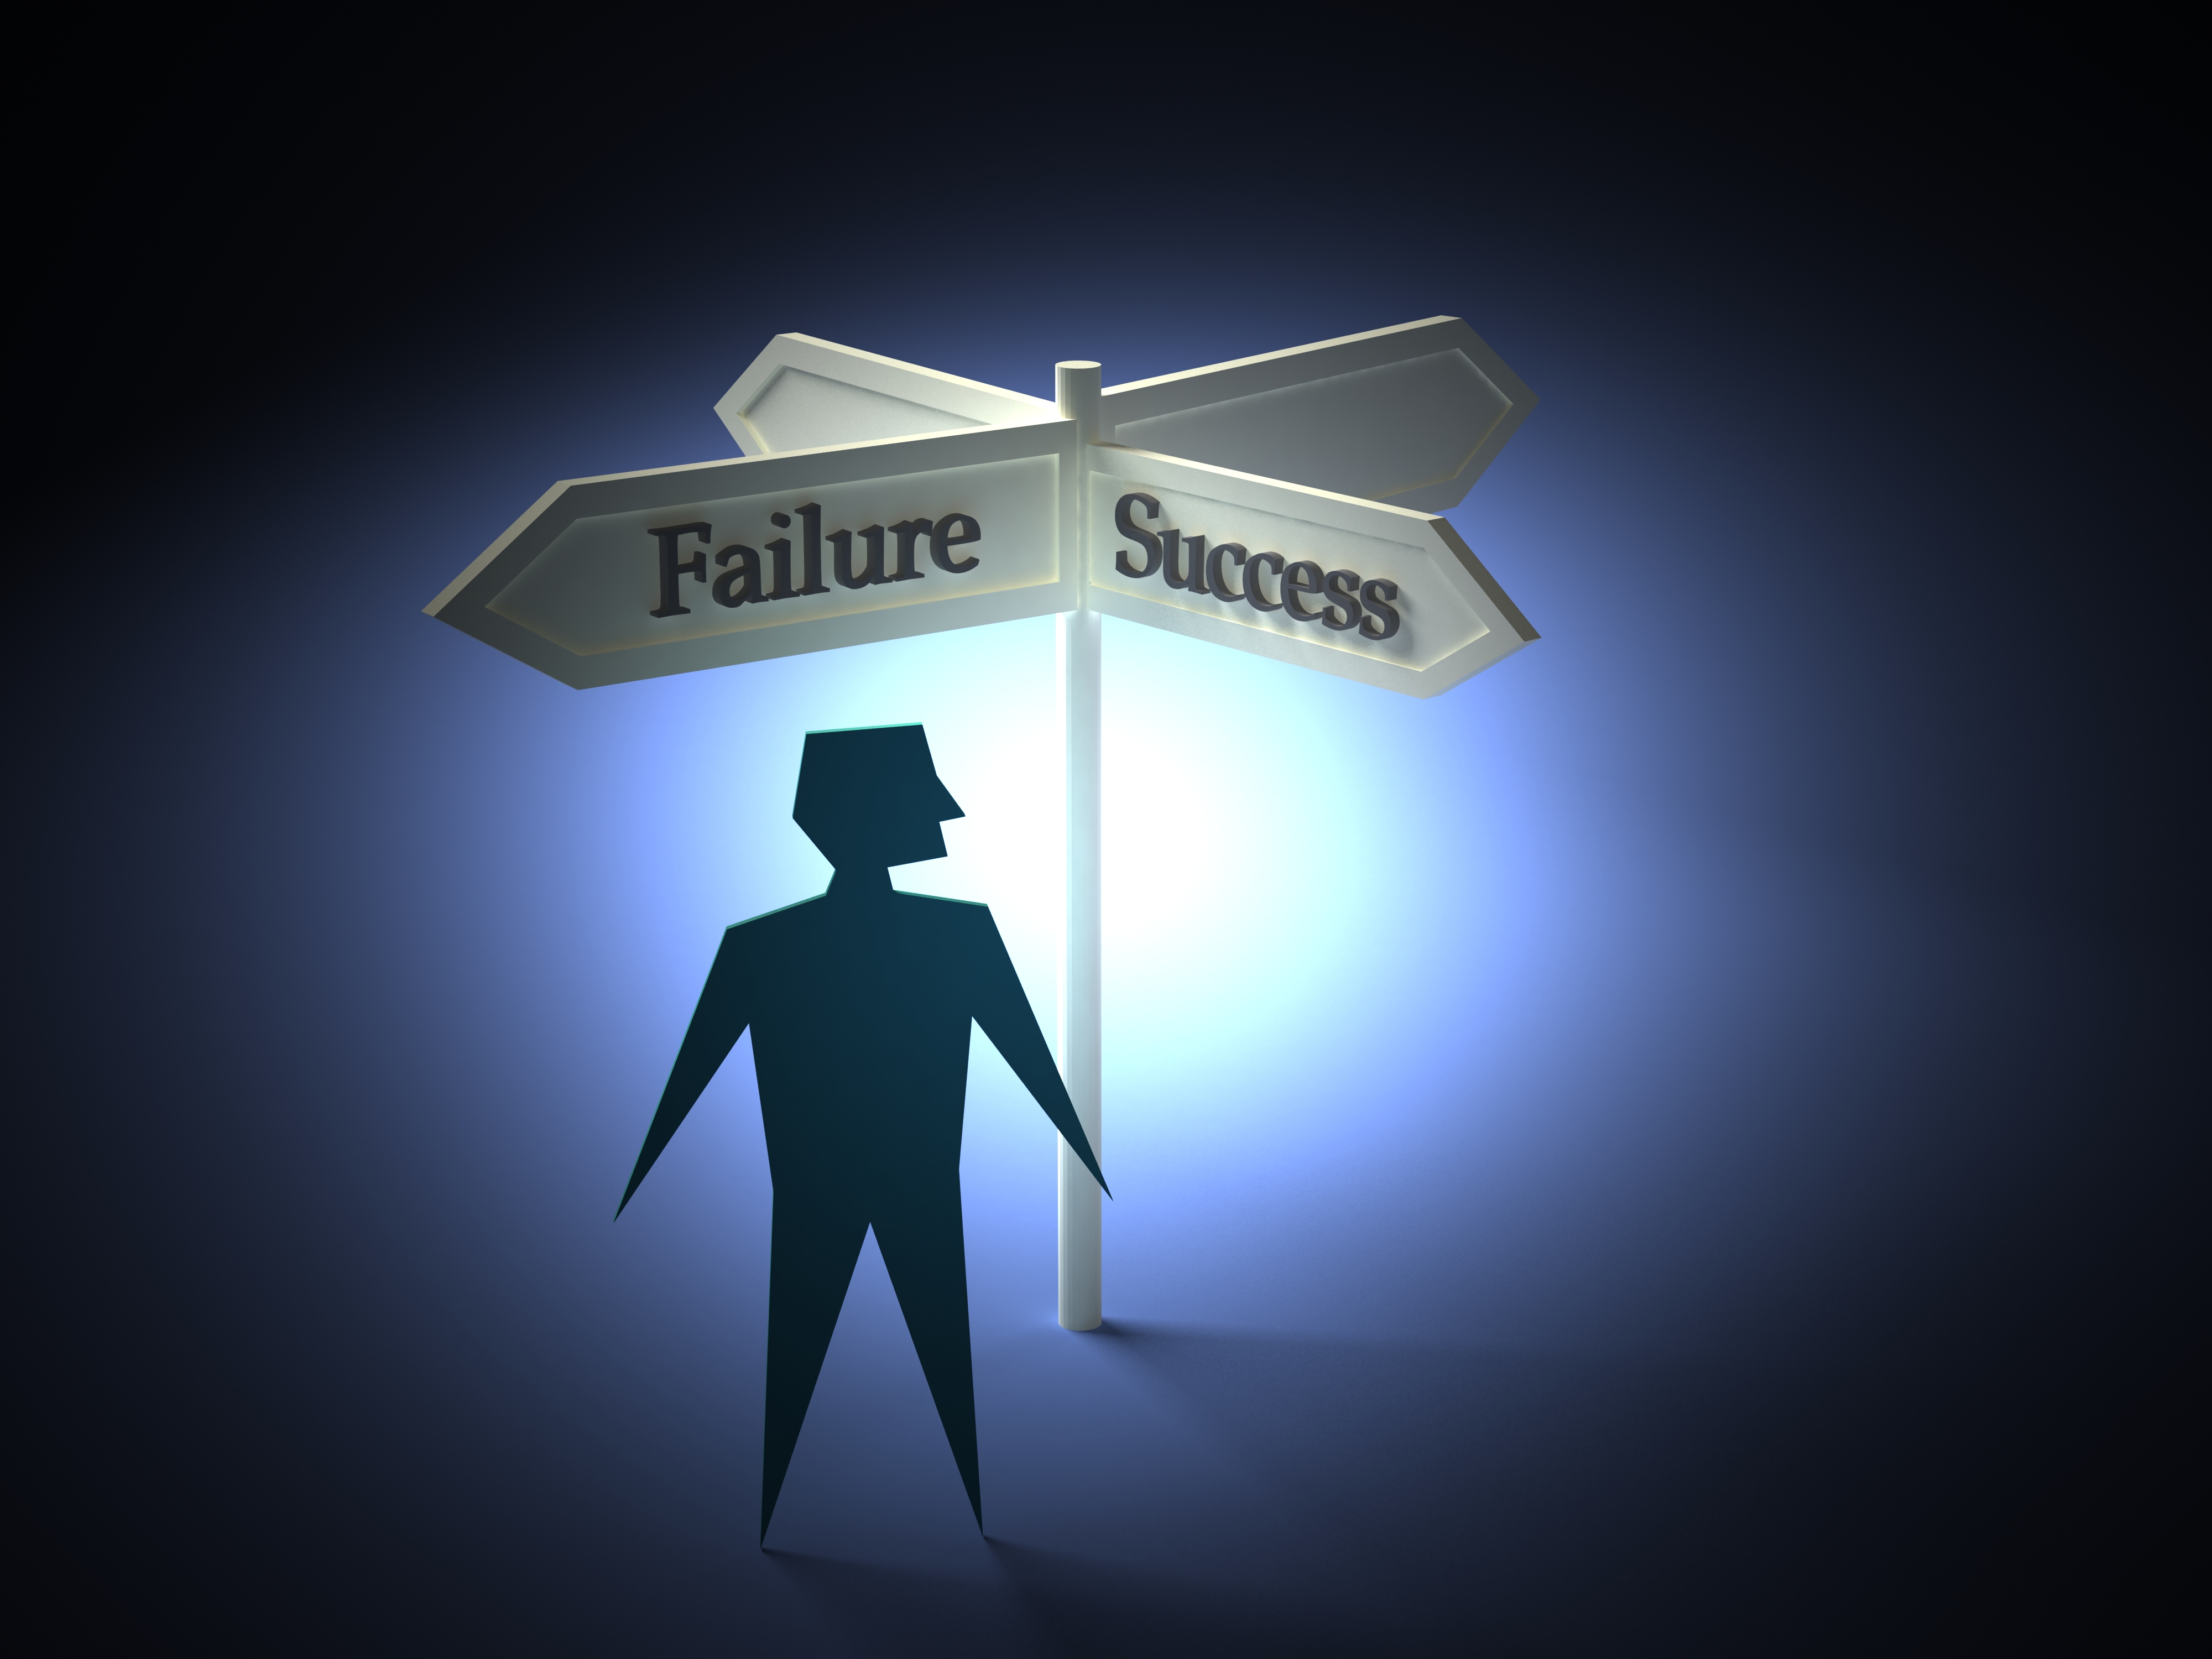 Stick figure standing by a sign that says Failure and Success pointing in two different directions, symbolizing the need for church leadership to make quick and fast decisions by defining the problem first and moving to a solution.